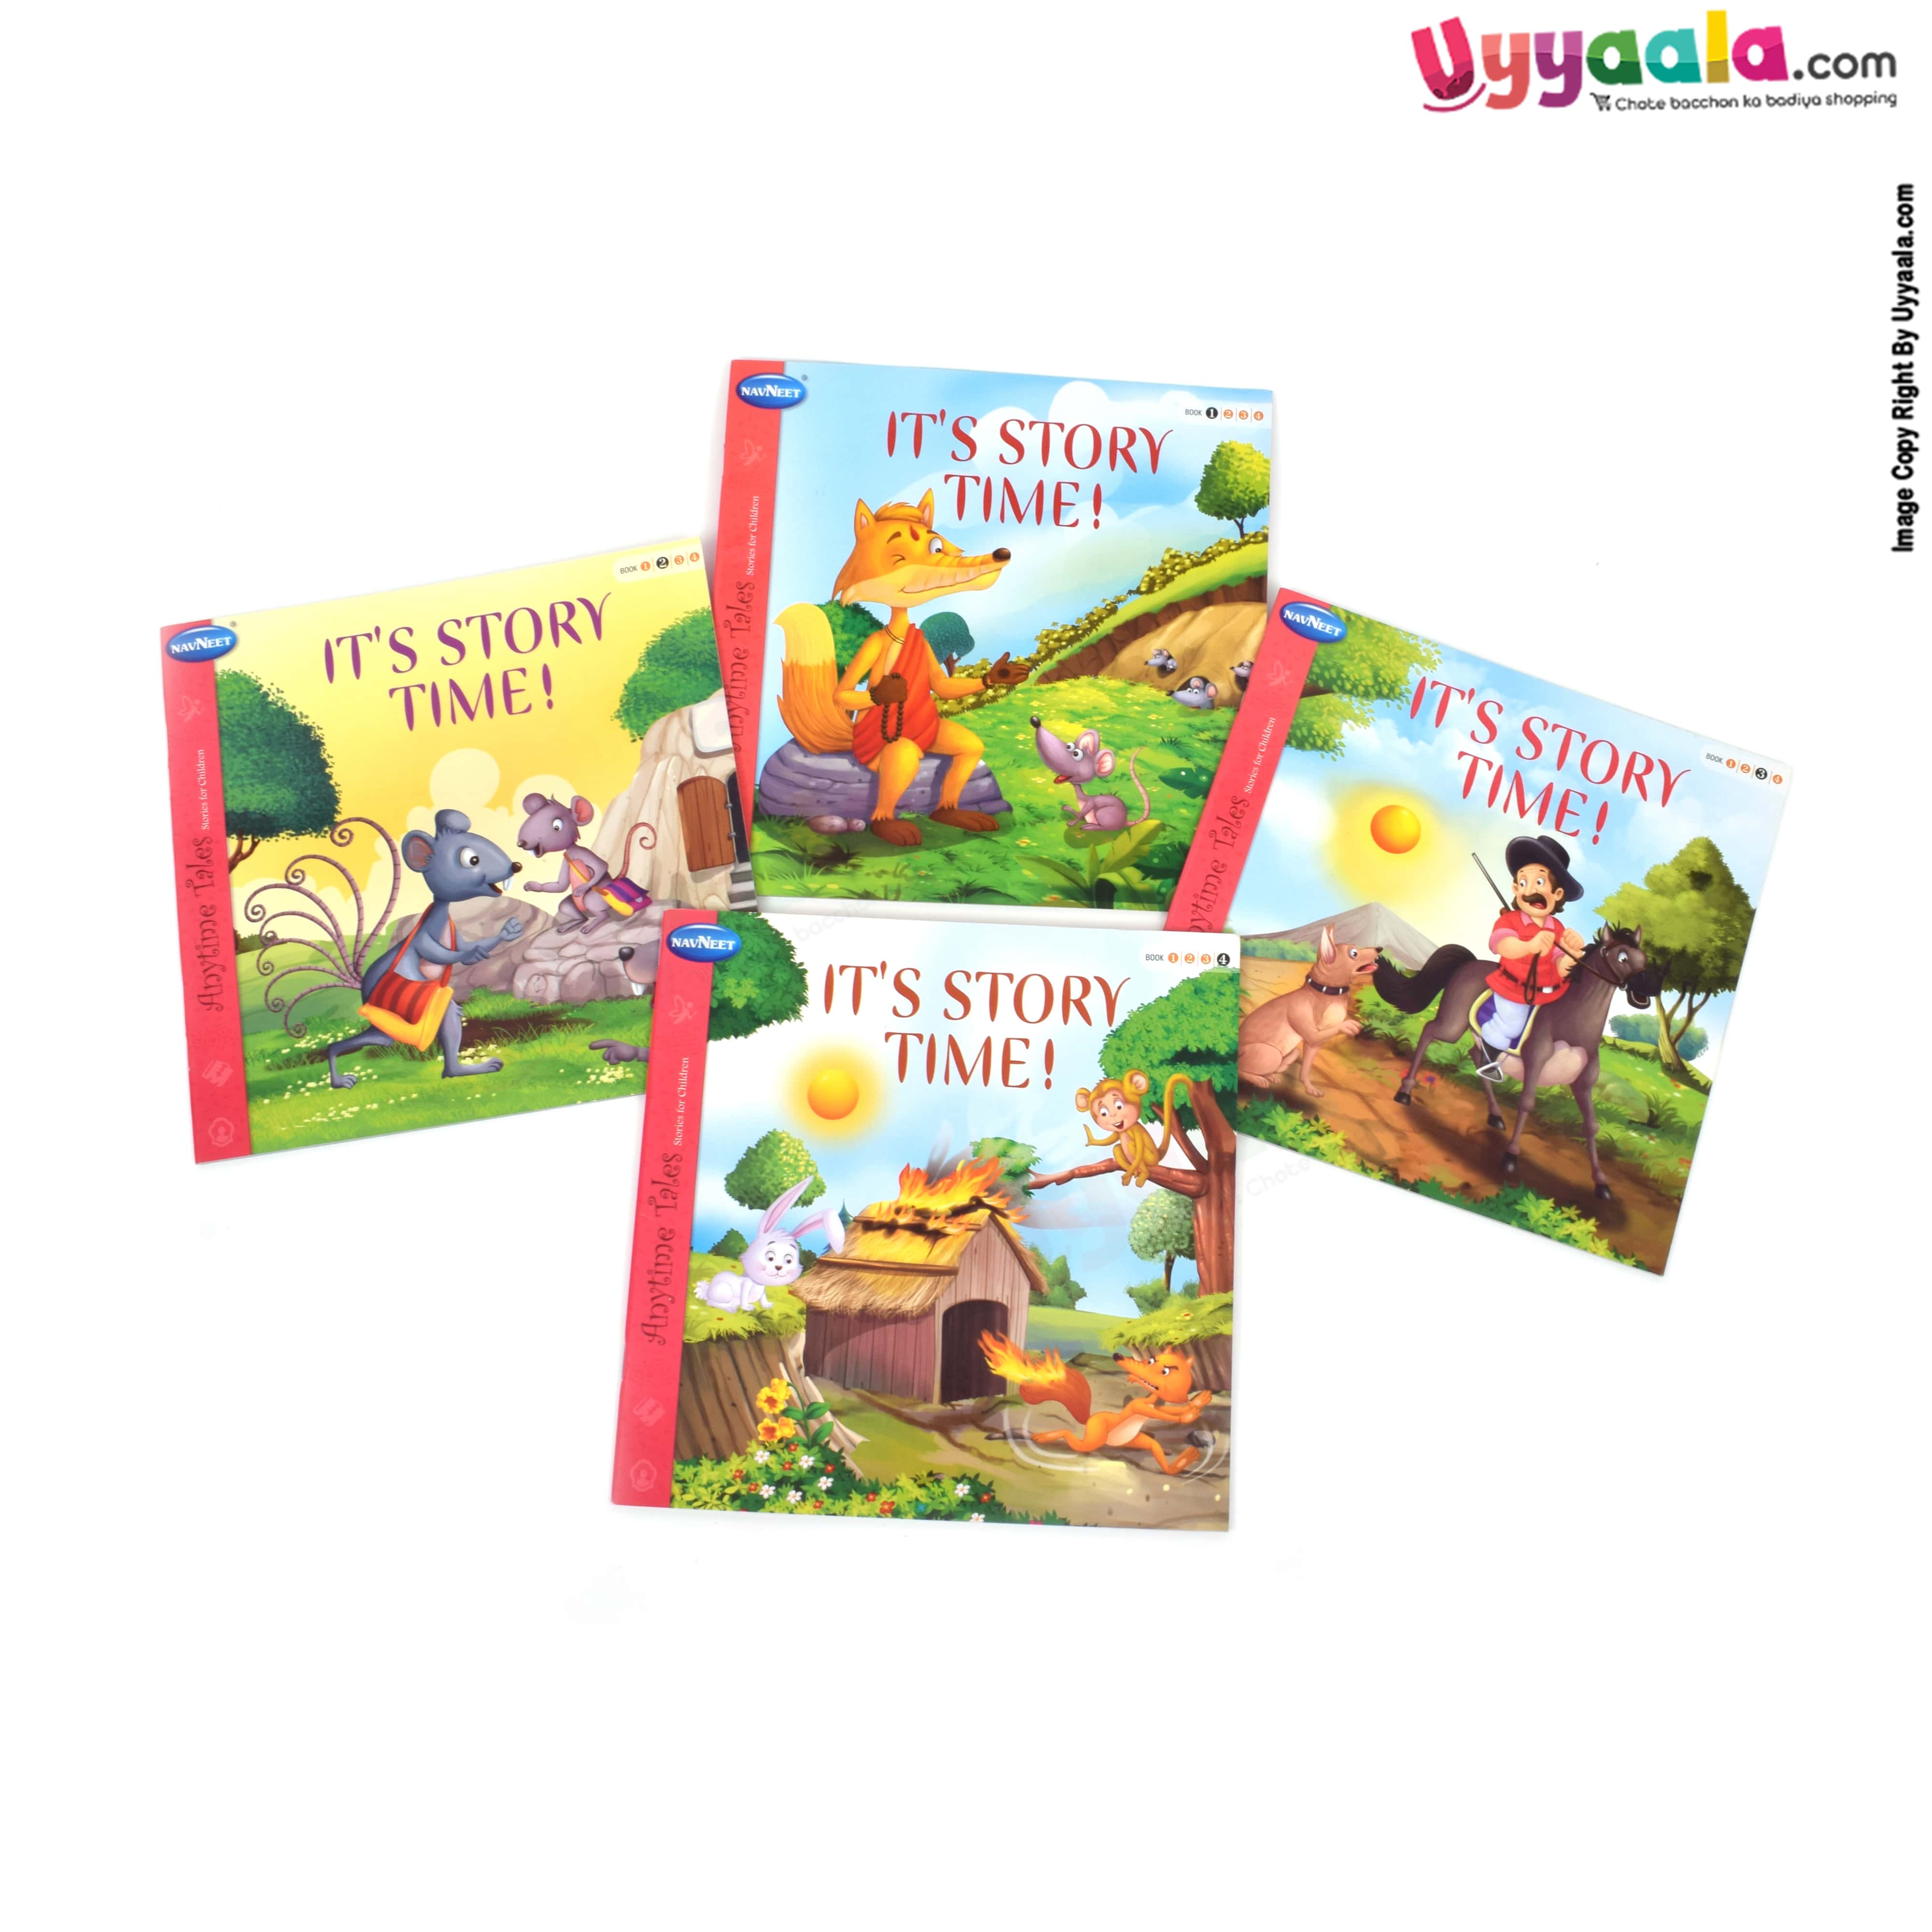 NAVNEET any time tales stories for children, Its story time pack of 4 - 4 volumes